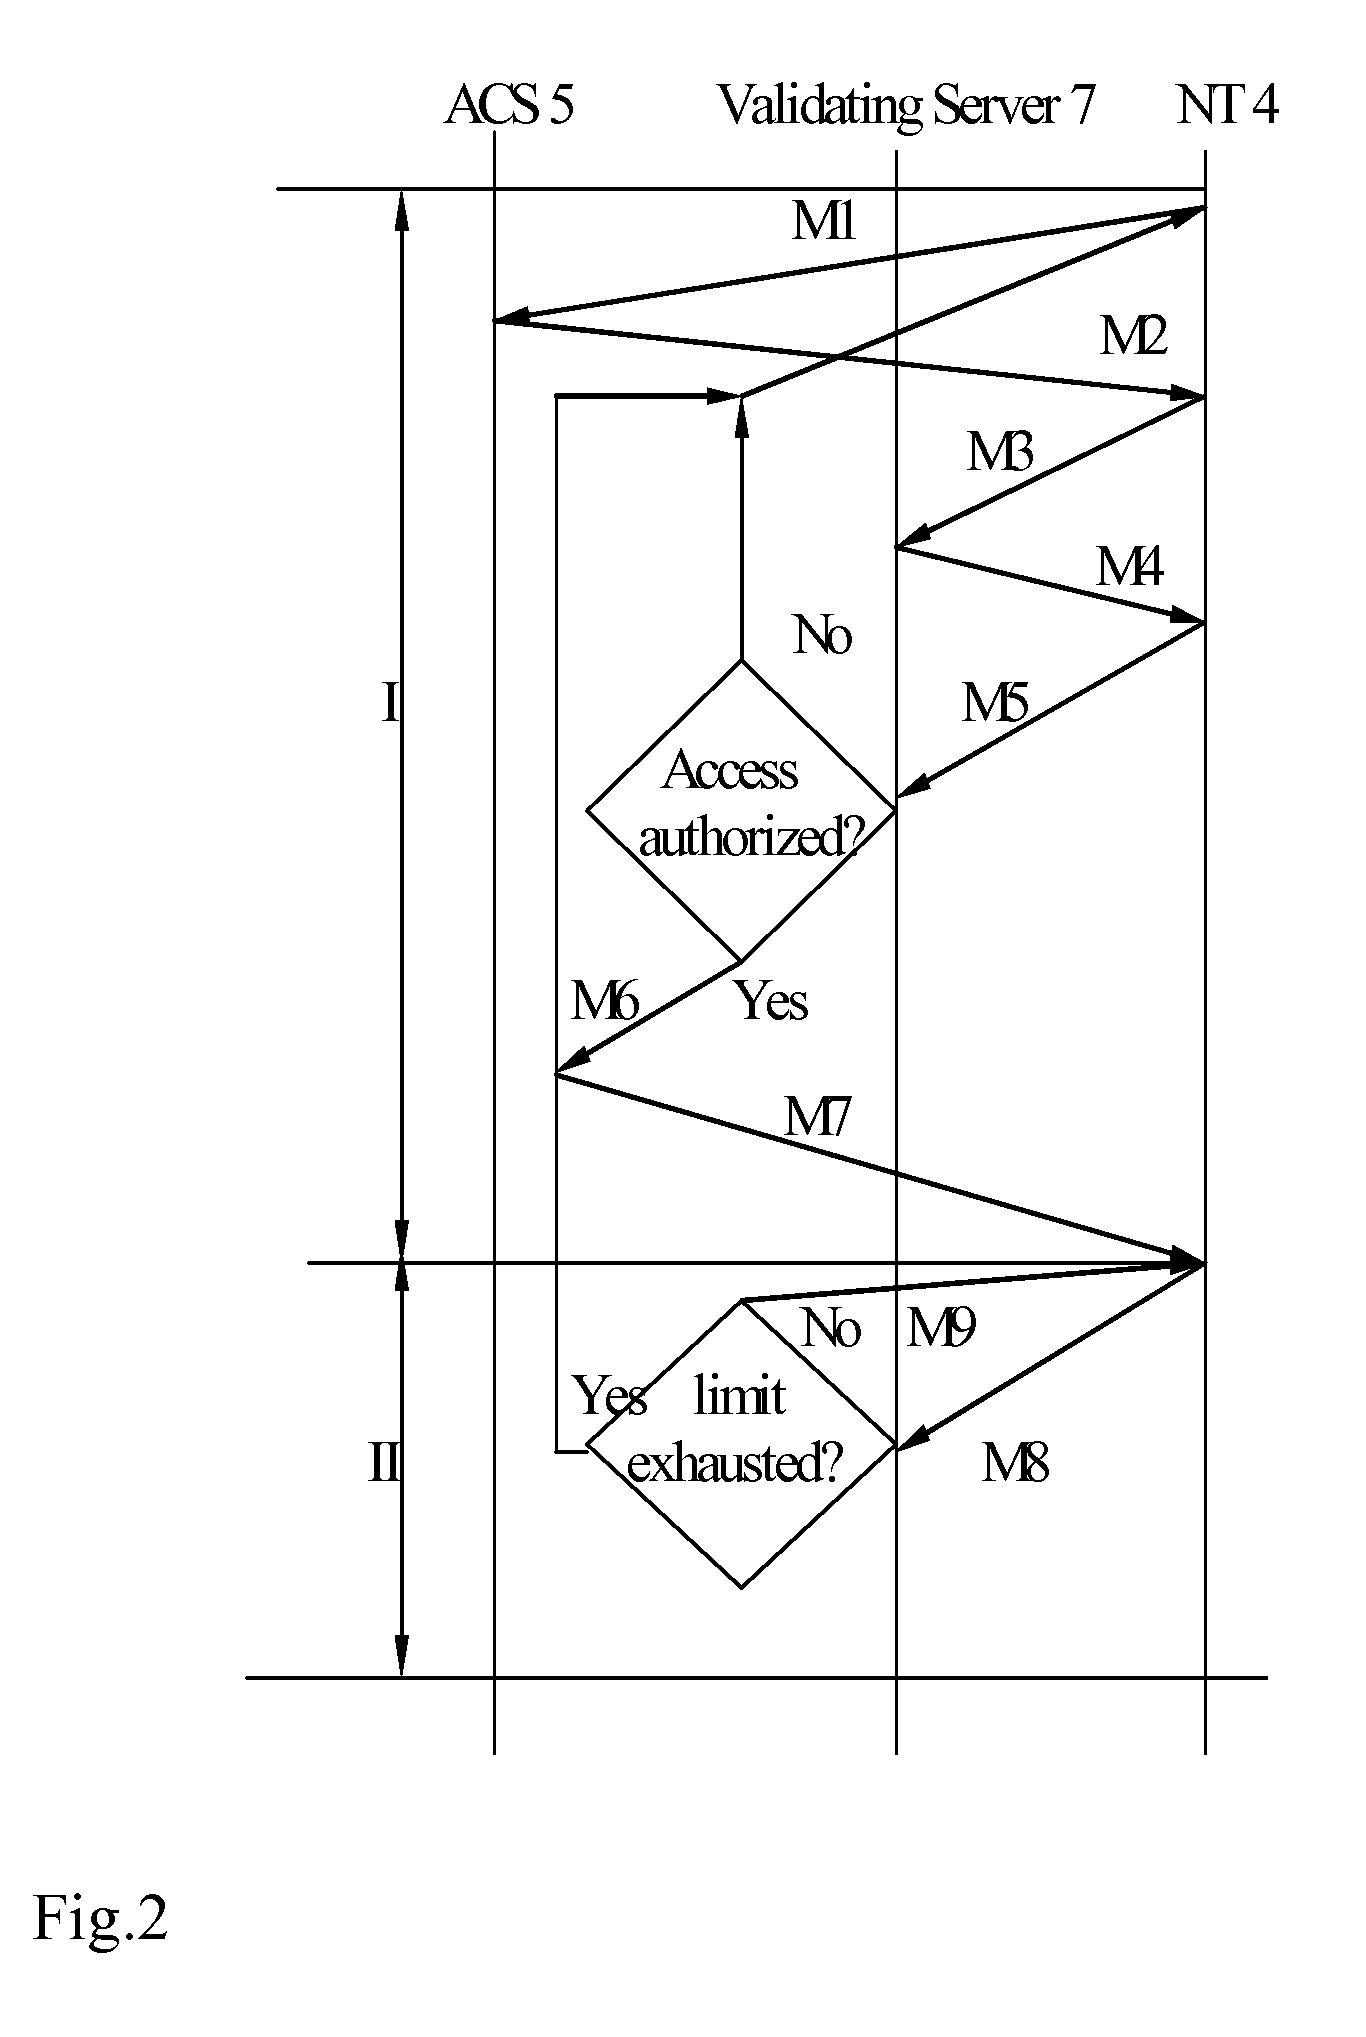 Conditional access system and method for limiting access to content in broadcasting and receiving systems